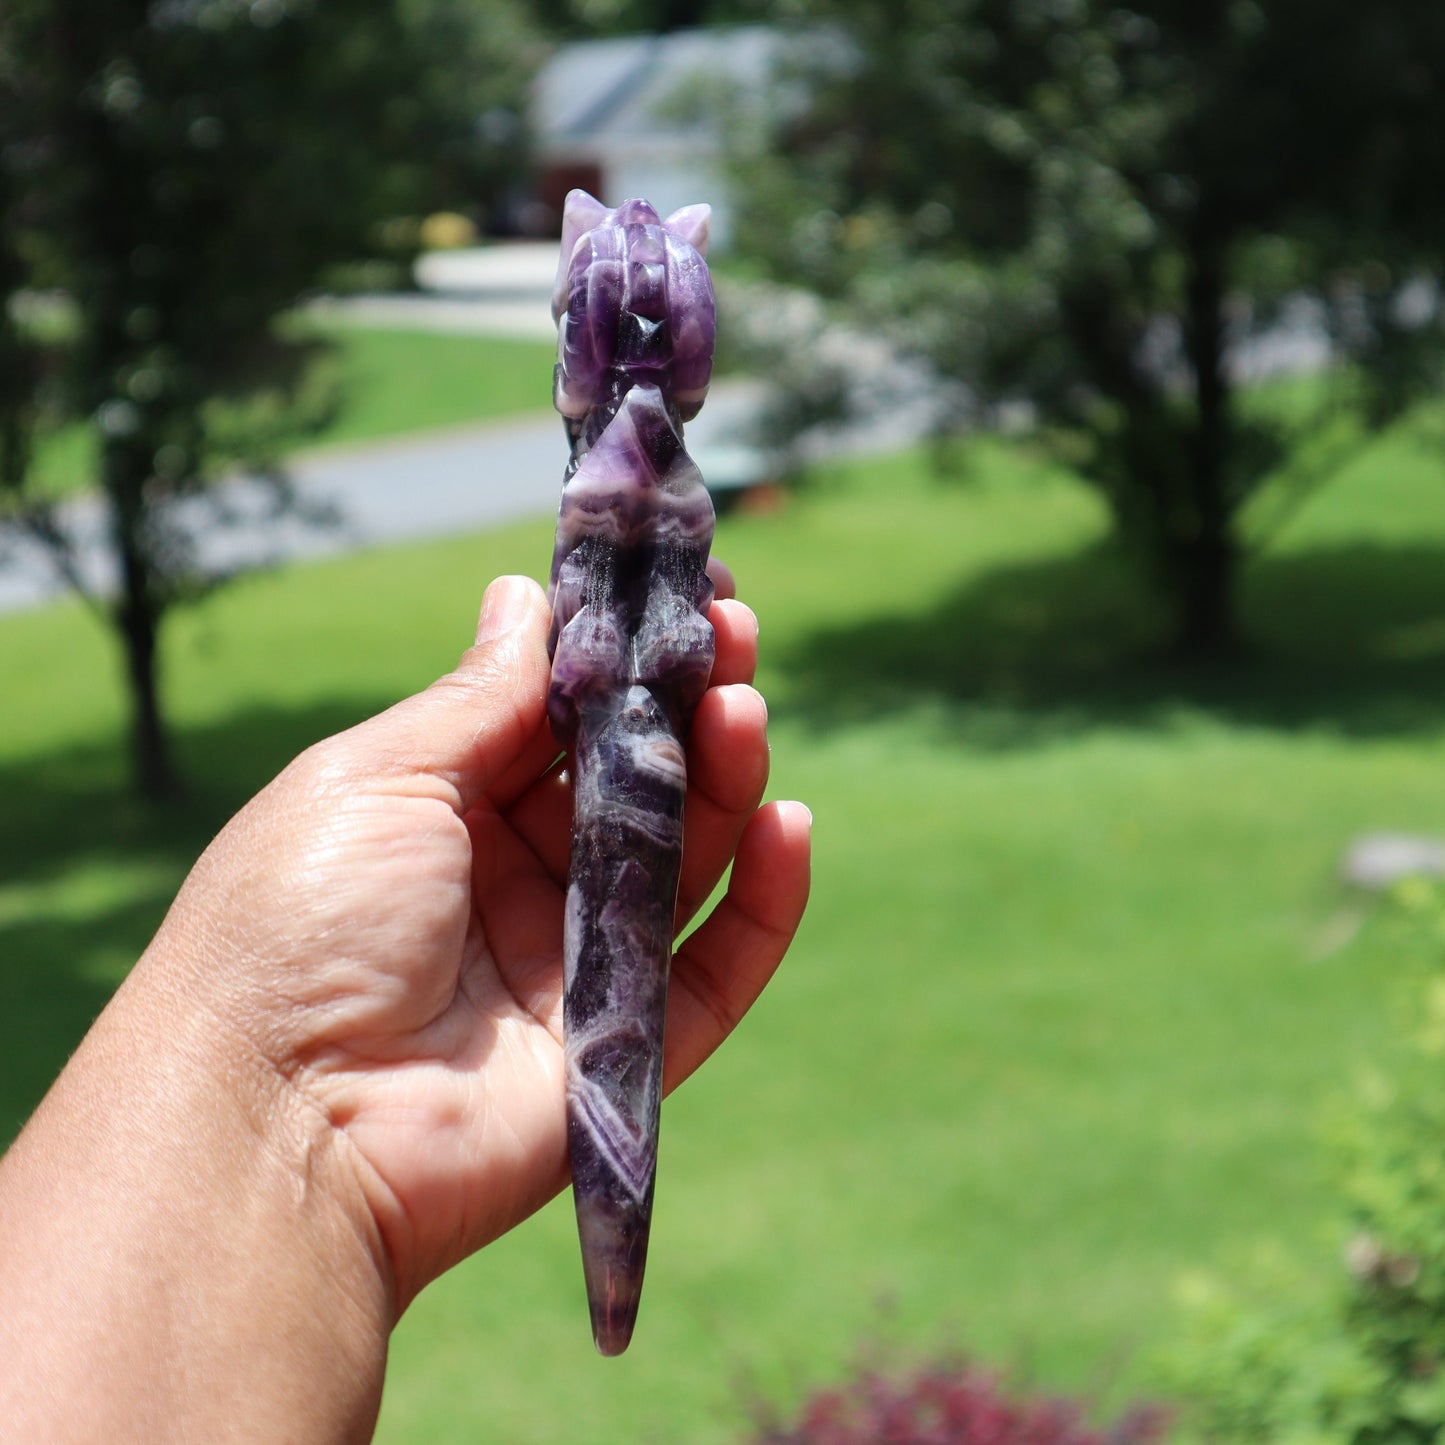 Dream Amethyst Wand, Crystal Healing Wand, Flying Dragon Wand, Magical Wand, Ritual Wand, Magical Tool for Spells and Rituals, Crystal Wand